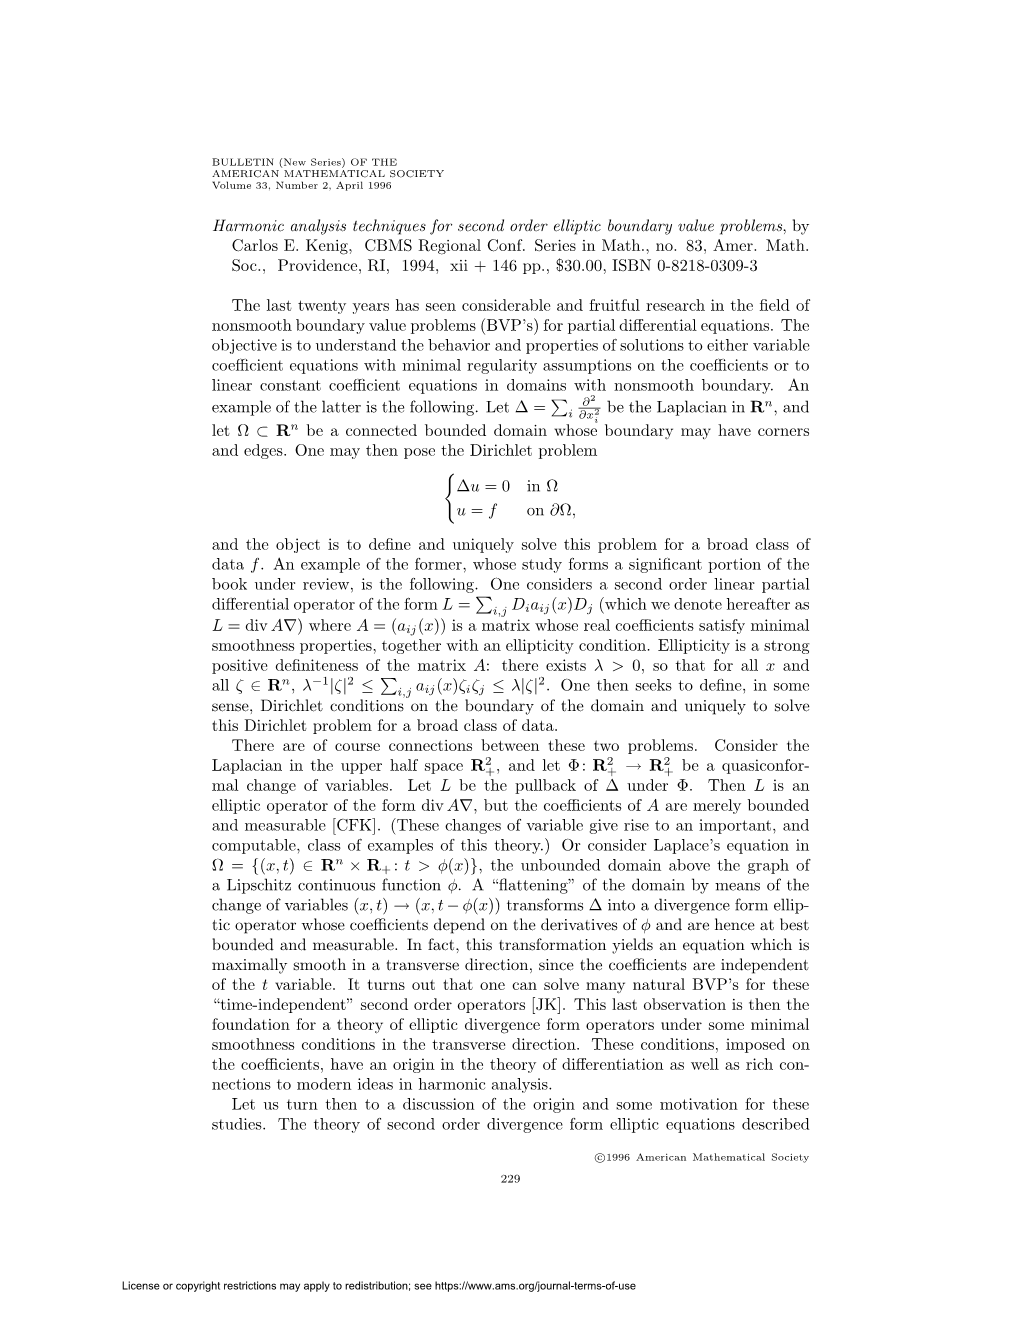 Harmonic Analysis Techniques for Second Order Elliptic Boundary Value Problems,By Carlos E